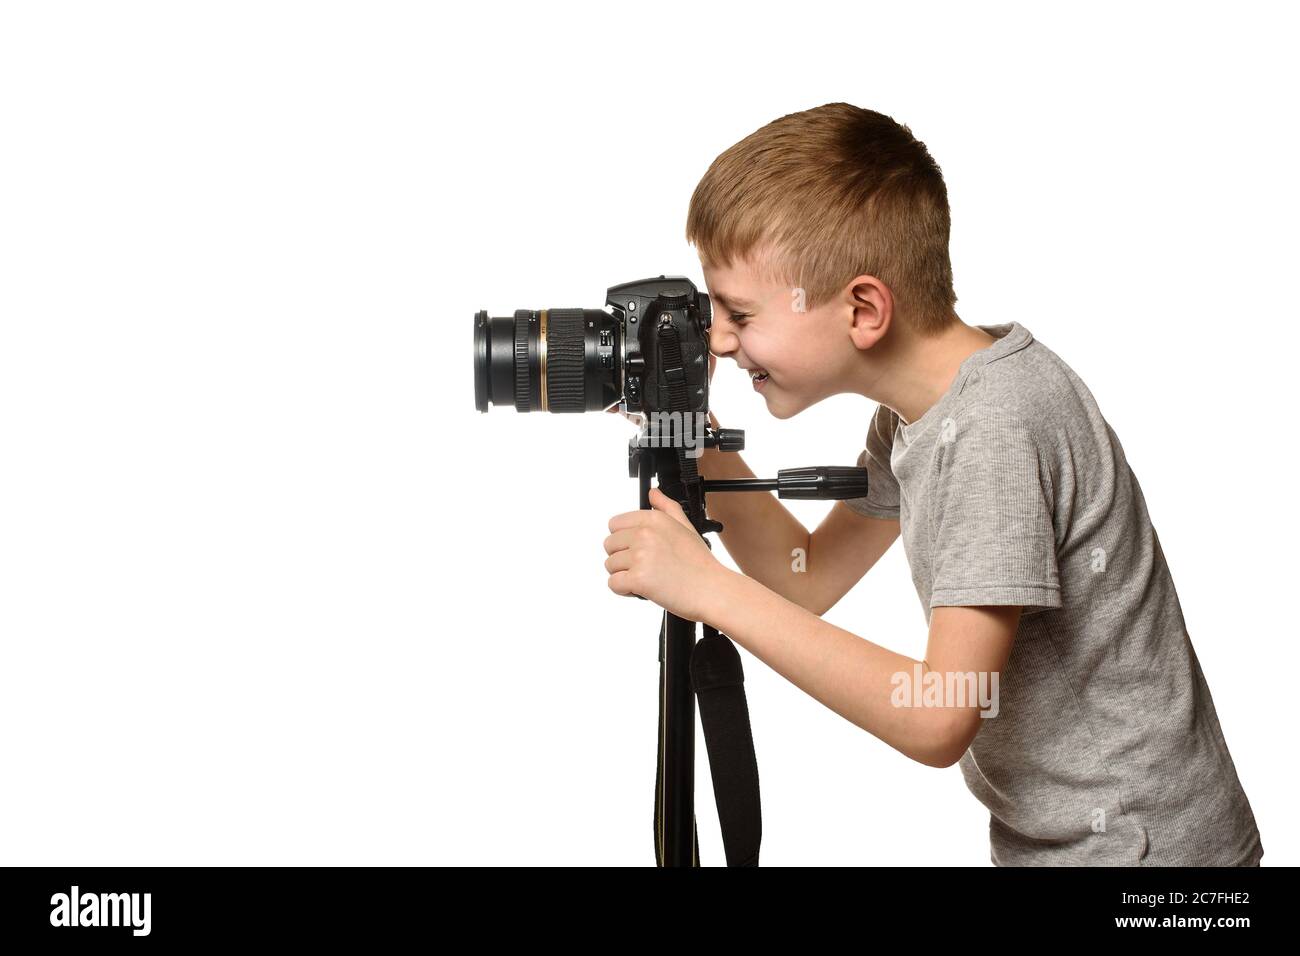 Smiling schoolboy takes pictures with a reflex camera. Side view. White background Stock Photo